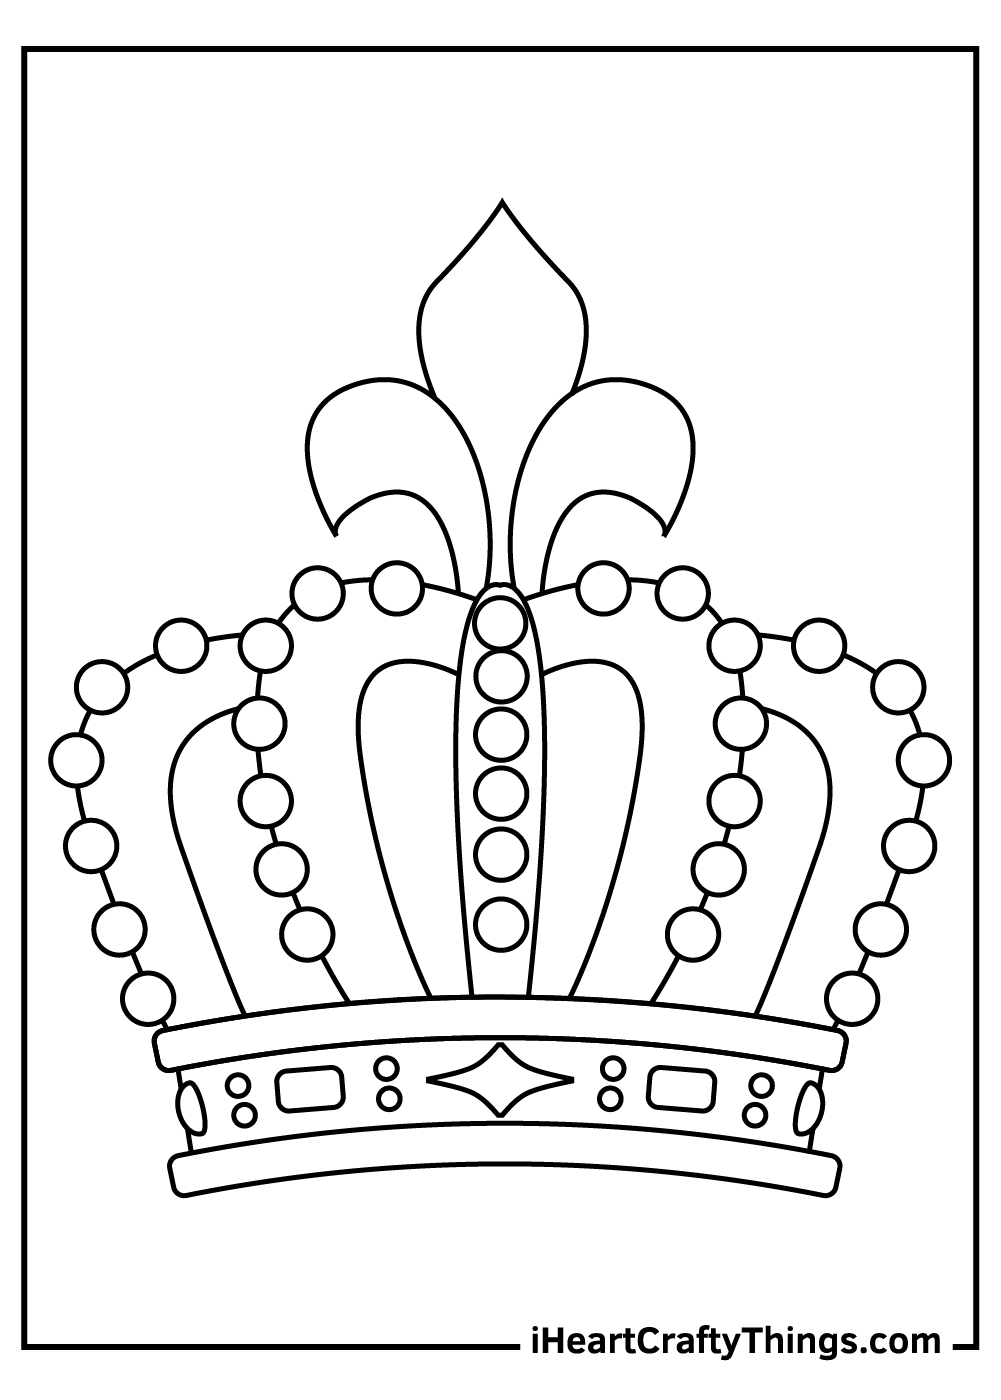 Crown Coloring Pages Updated 2021 